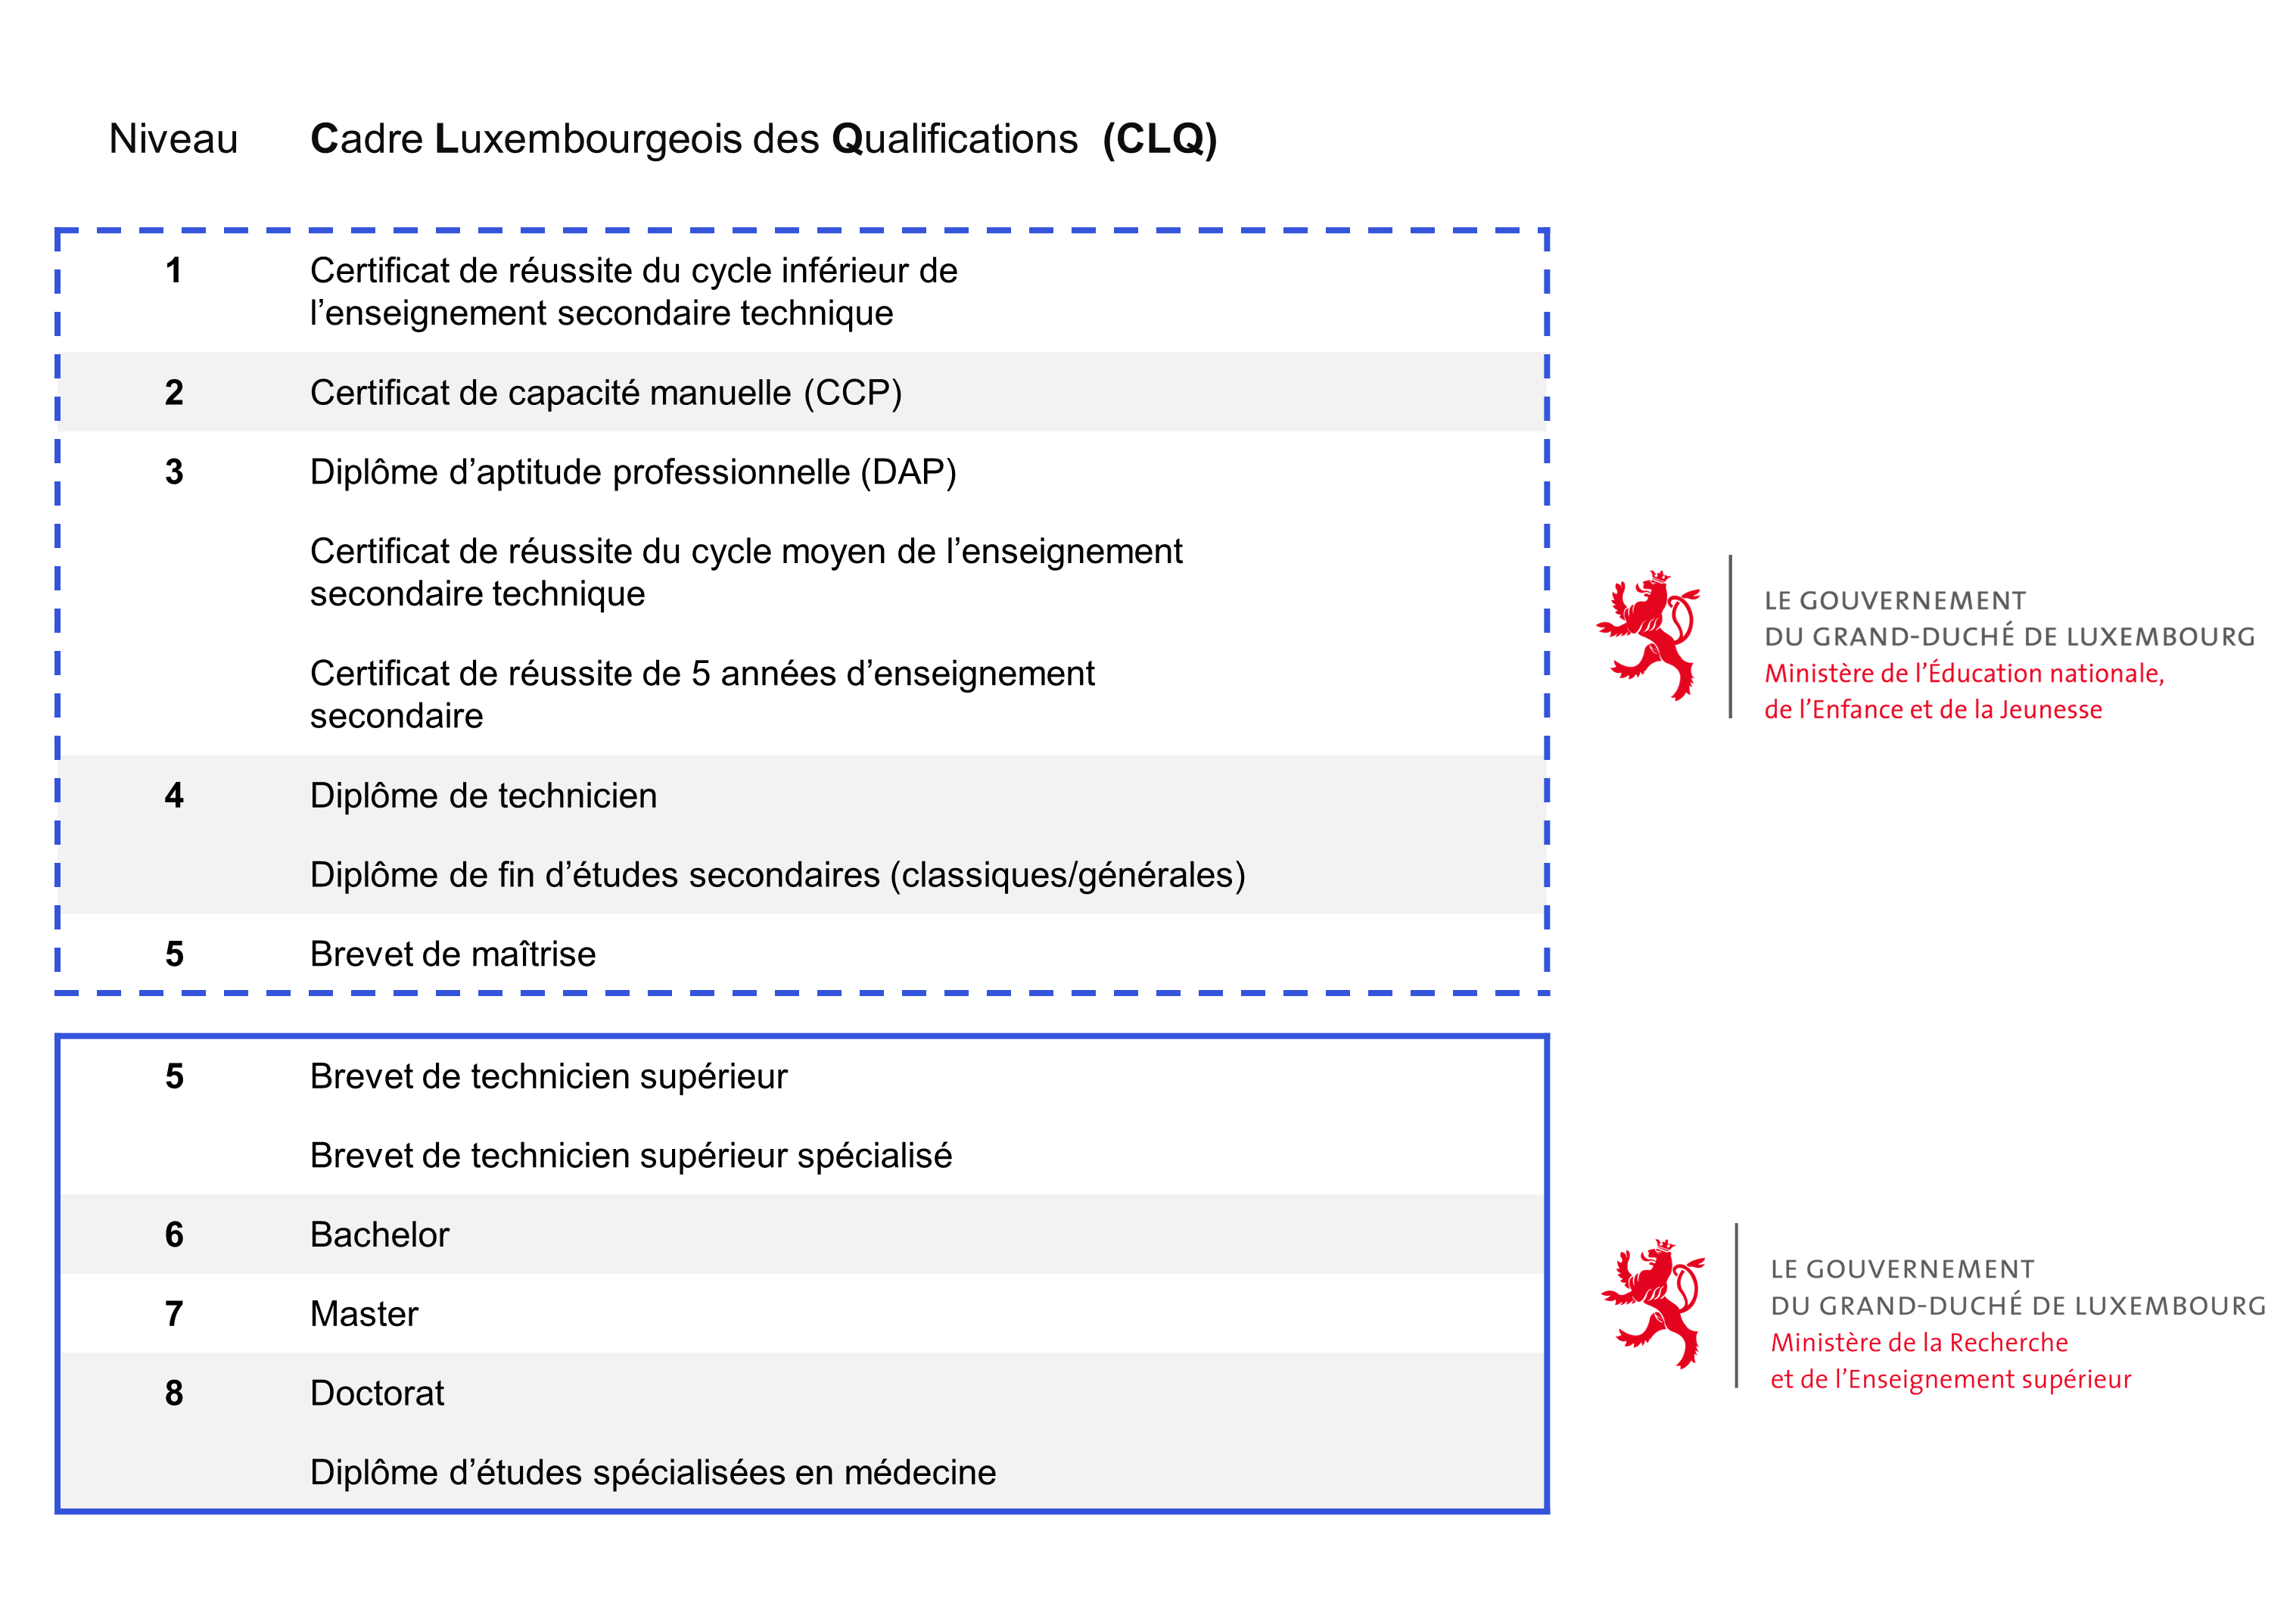 Cadre Luxembourgeois des Qualifications (CLQ)